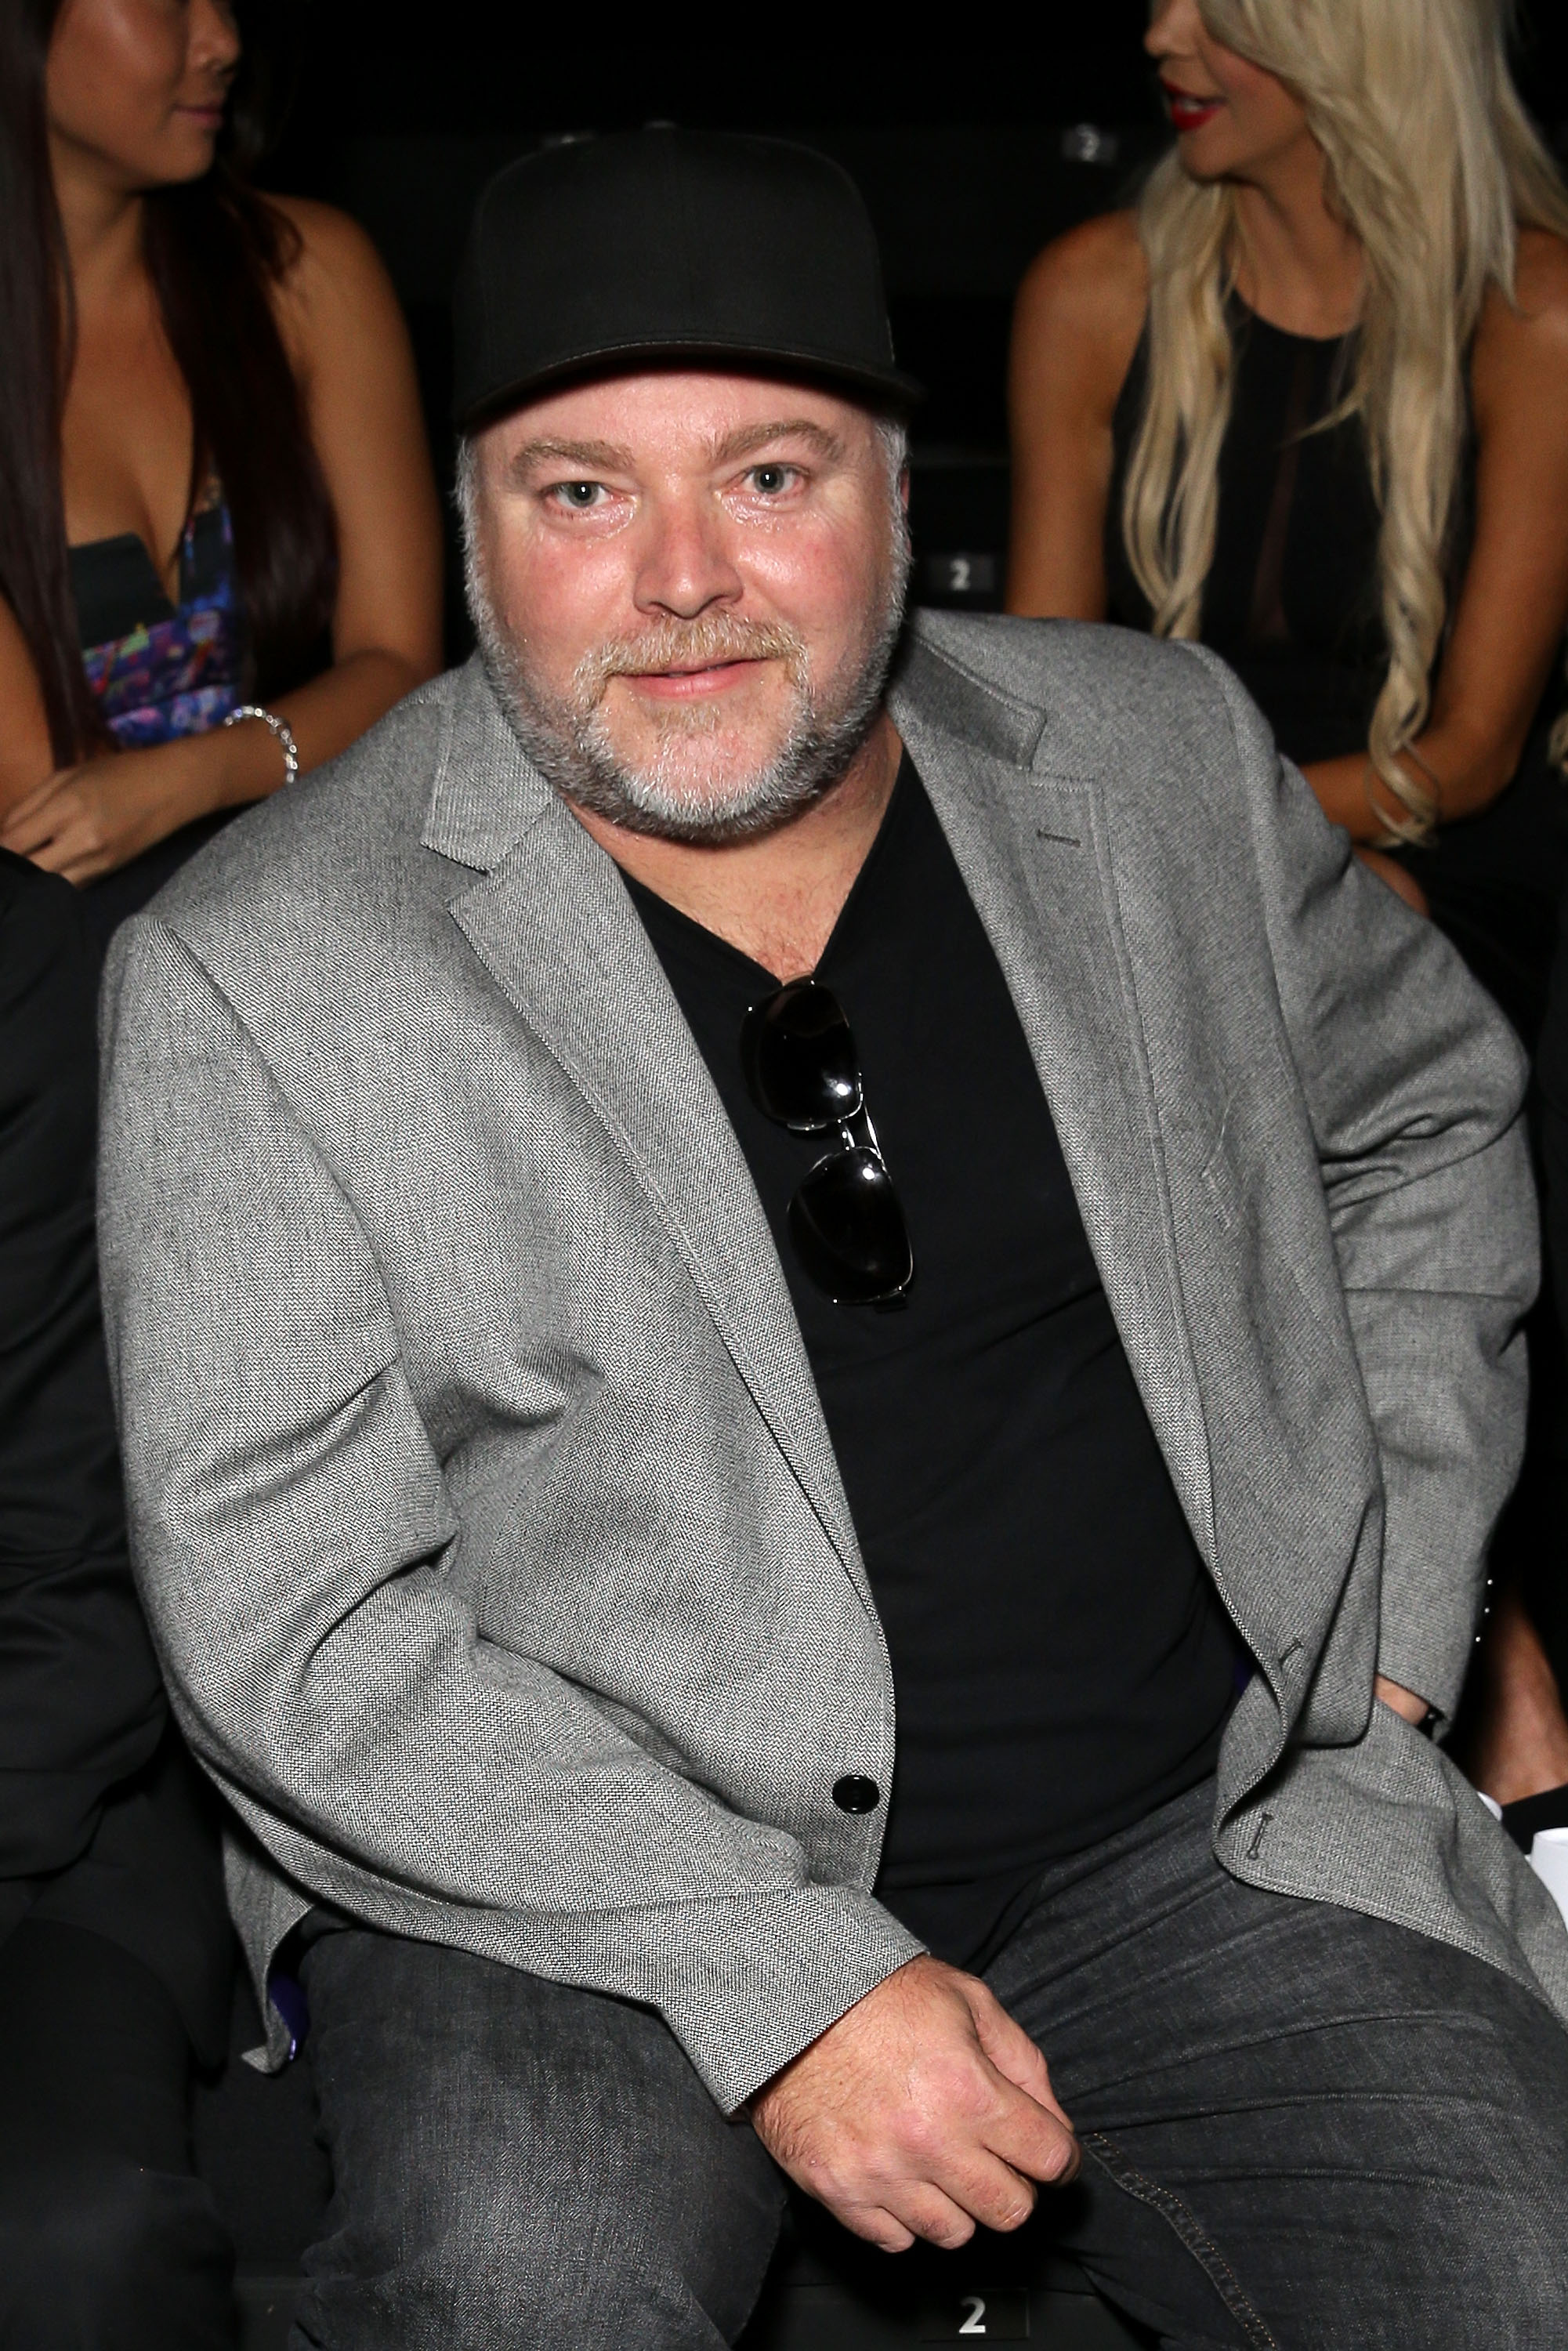 Kyle Sandilands attends the Swim show during Mercedes-Benz Fashion Week Australia 2014 at Carriageworks on April 8, 2014 in Sydney, Australia.